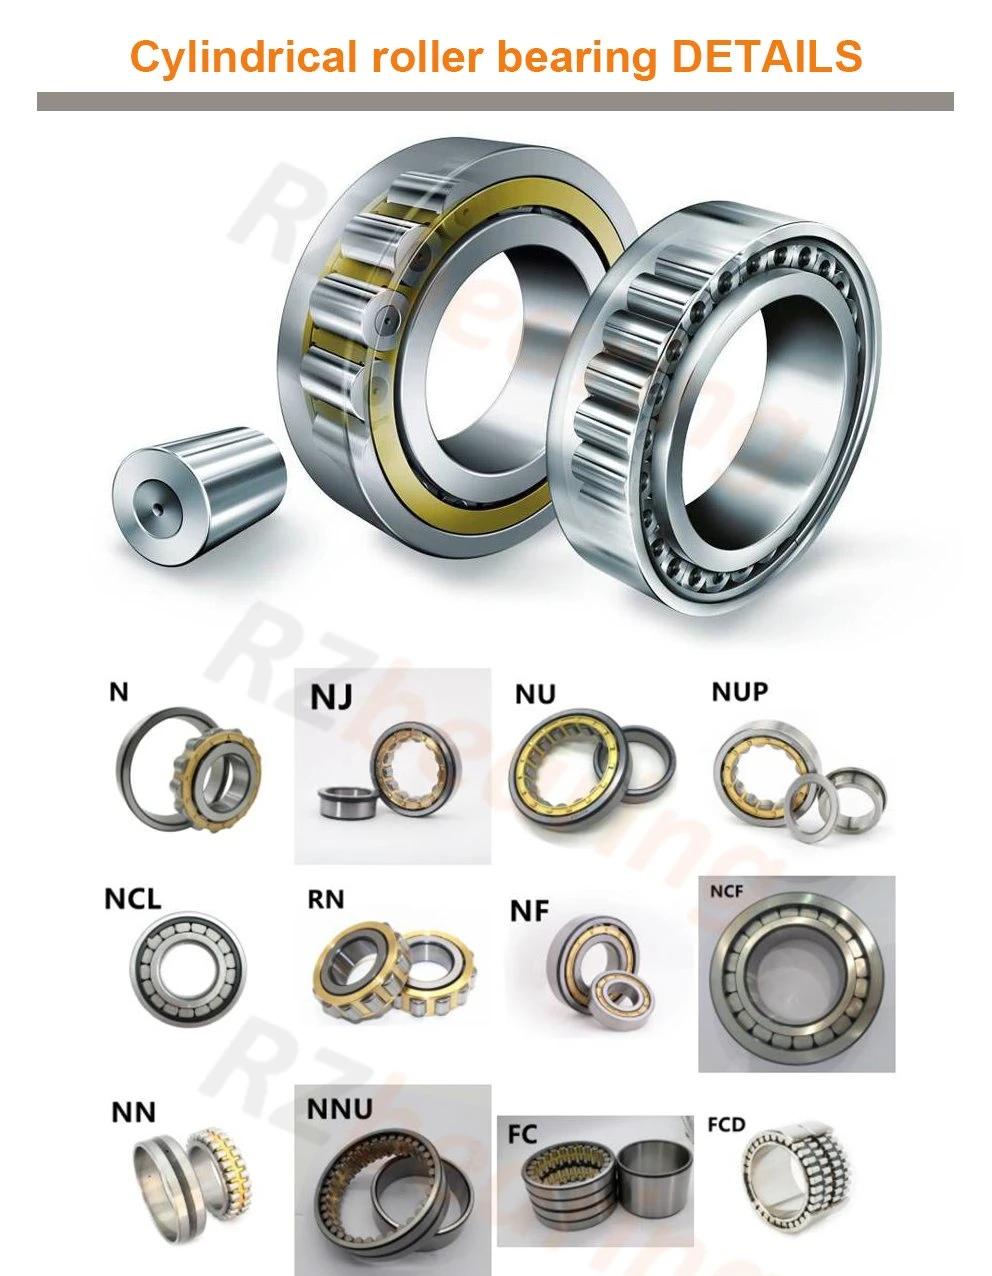 Bearings Needle Roller Bearing Hot Sale Cylindrical Roller Bearing Nu1011 with Factory Cheap Price